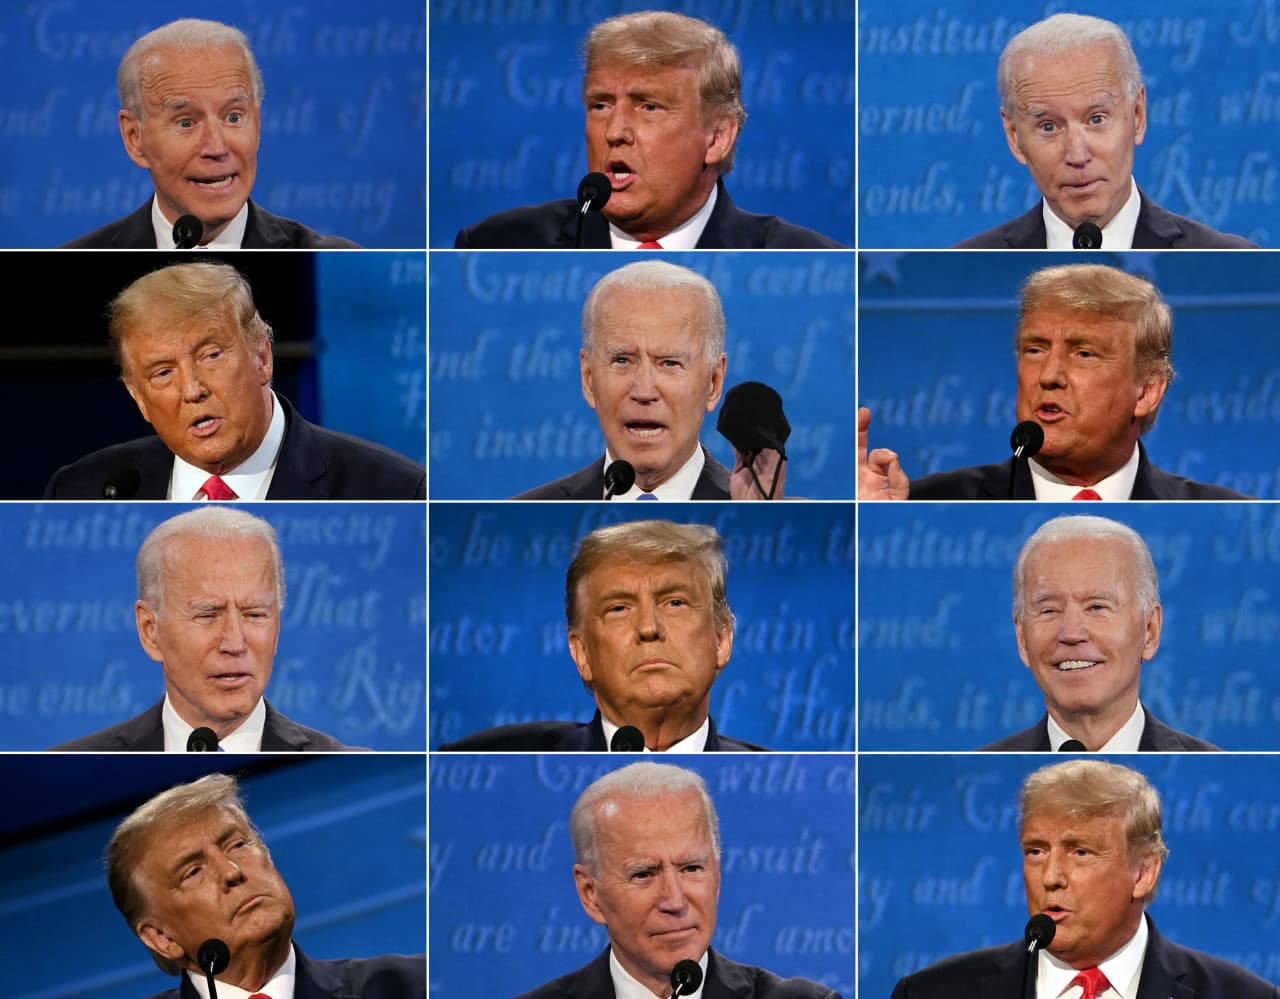 What should Biden and Trump say to America’s most important voting bloc — seniors?